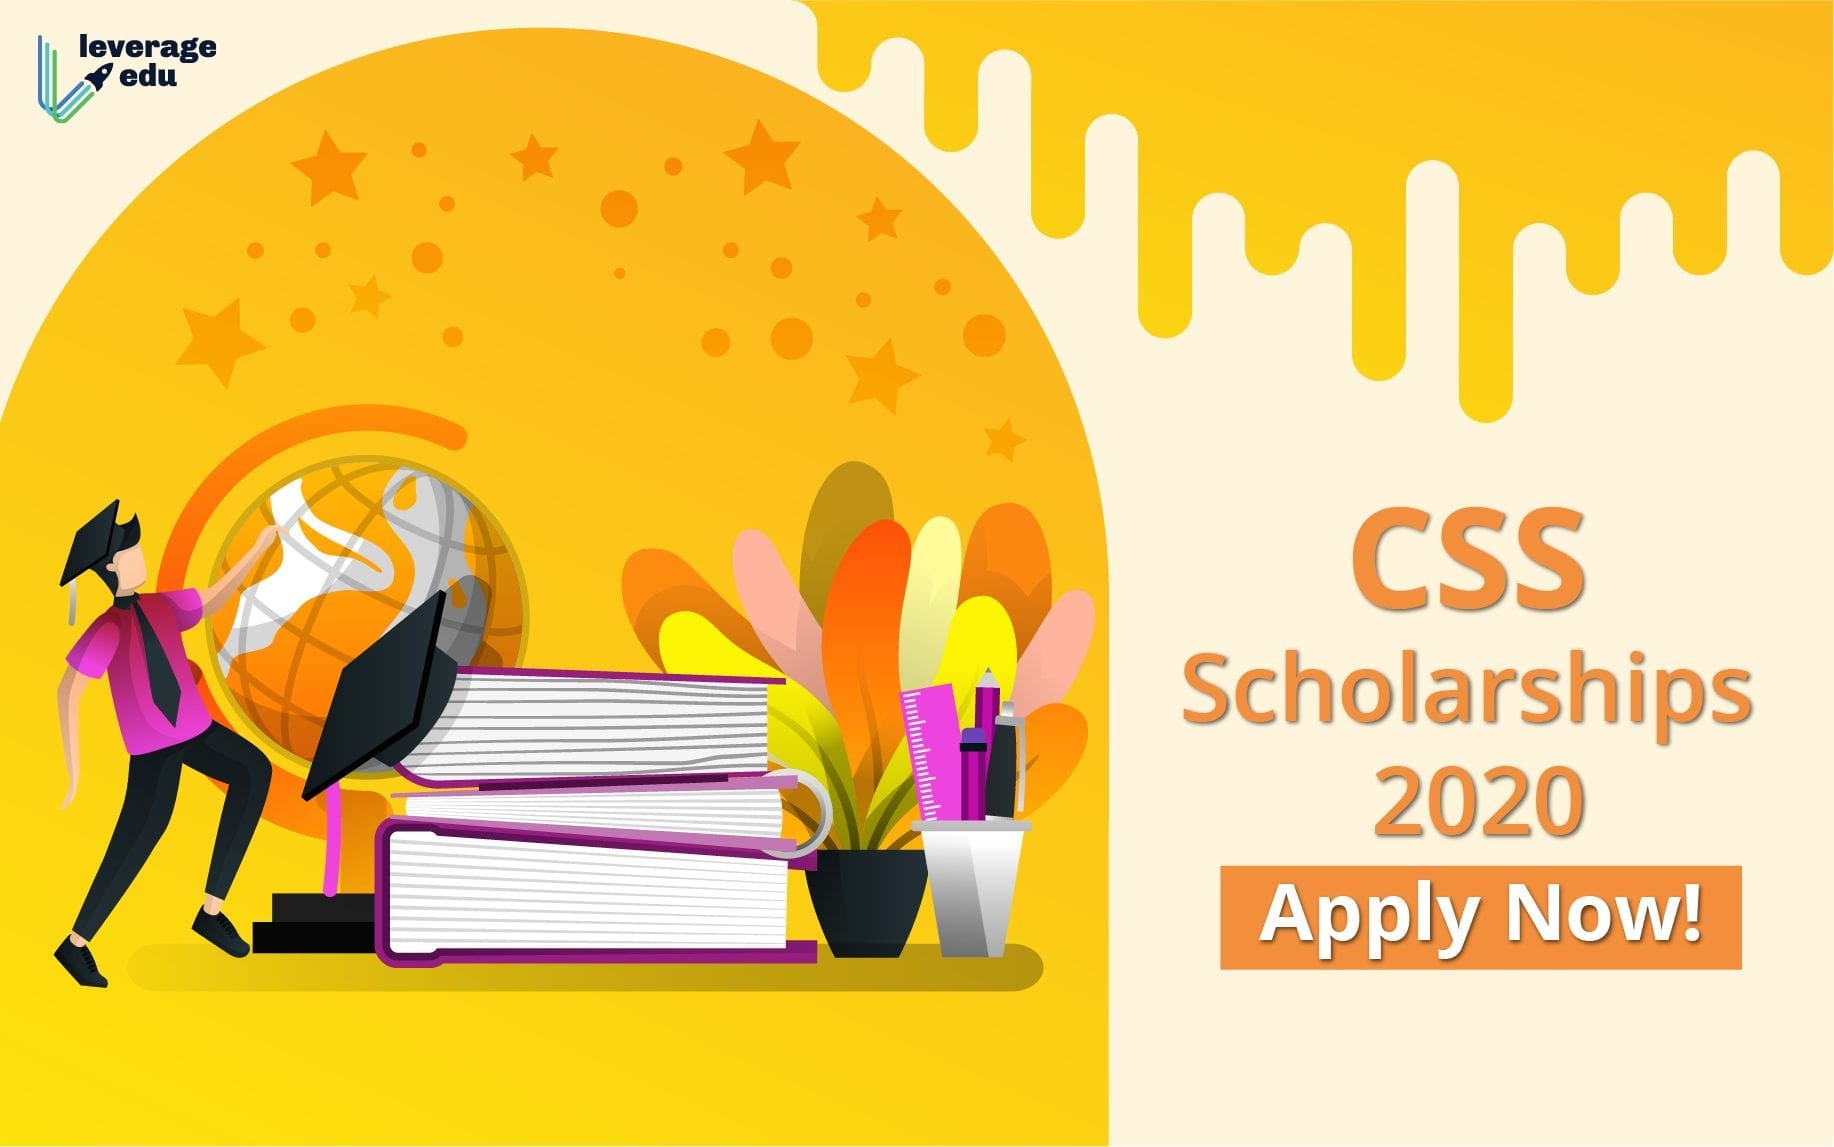 Apply Now for Central Sector CSS Scholarship 2023! Leverage Edu